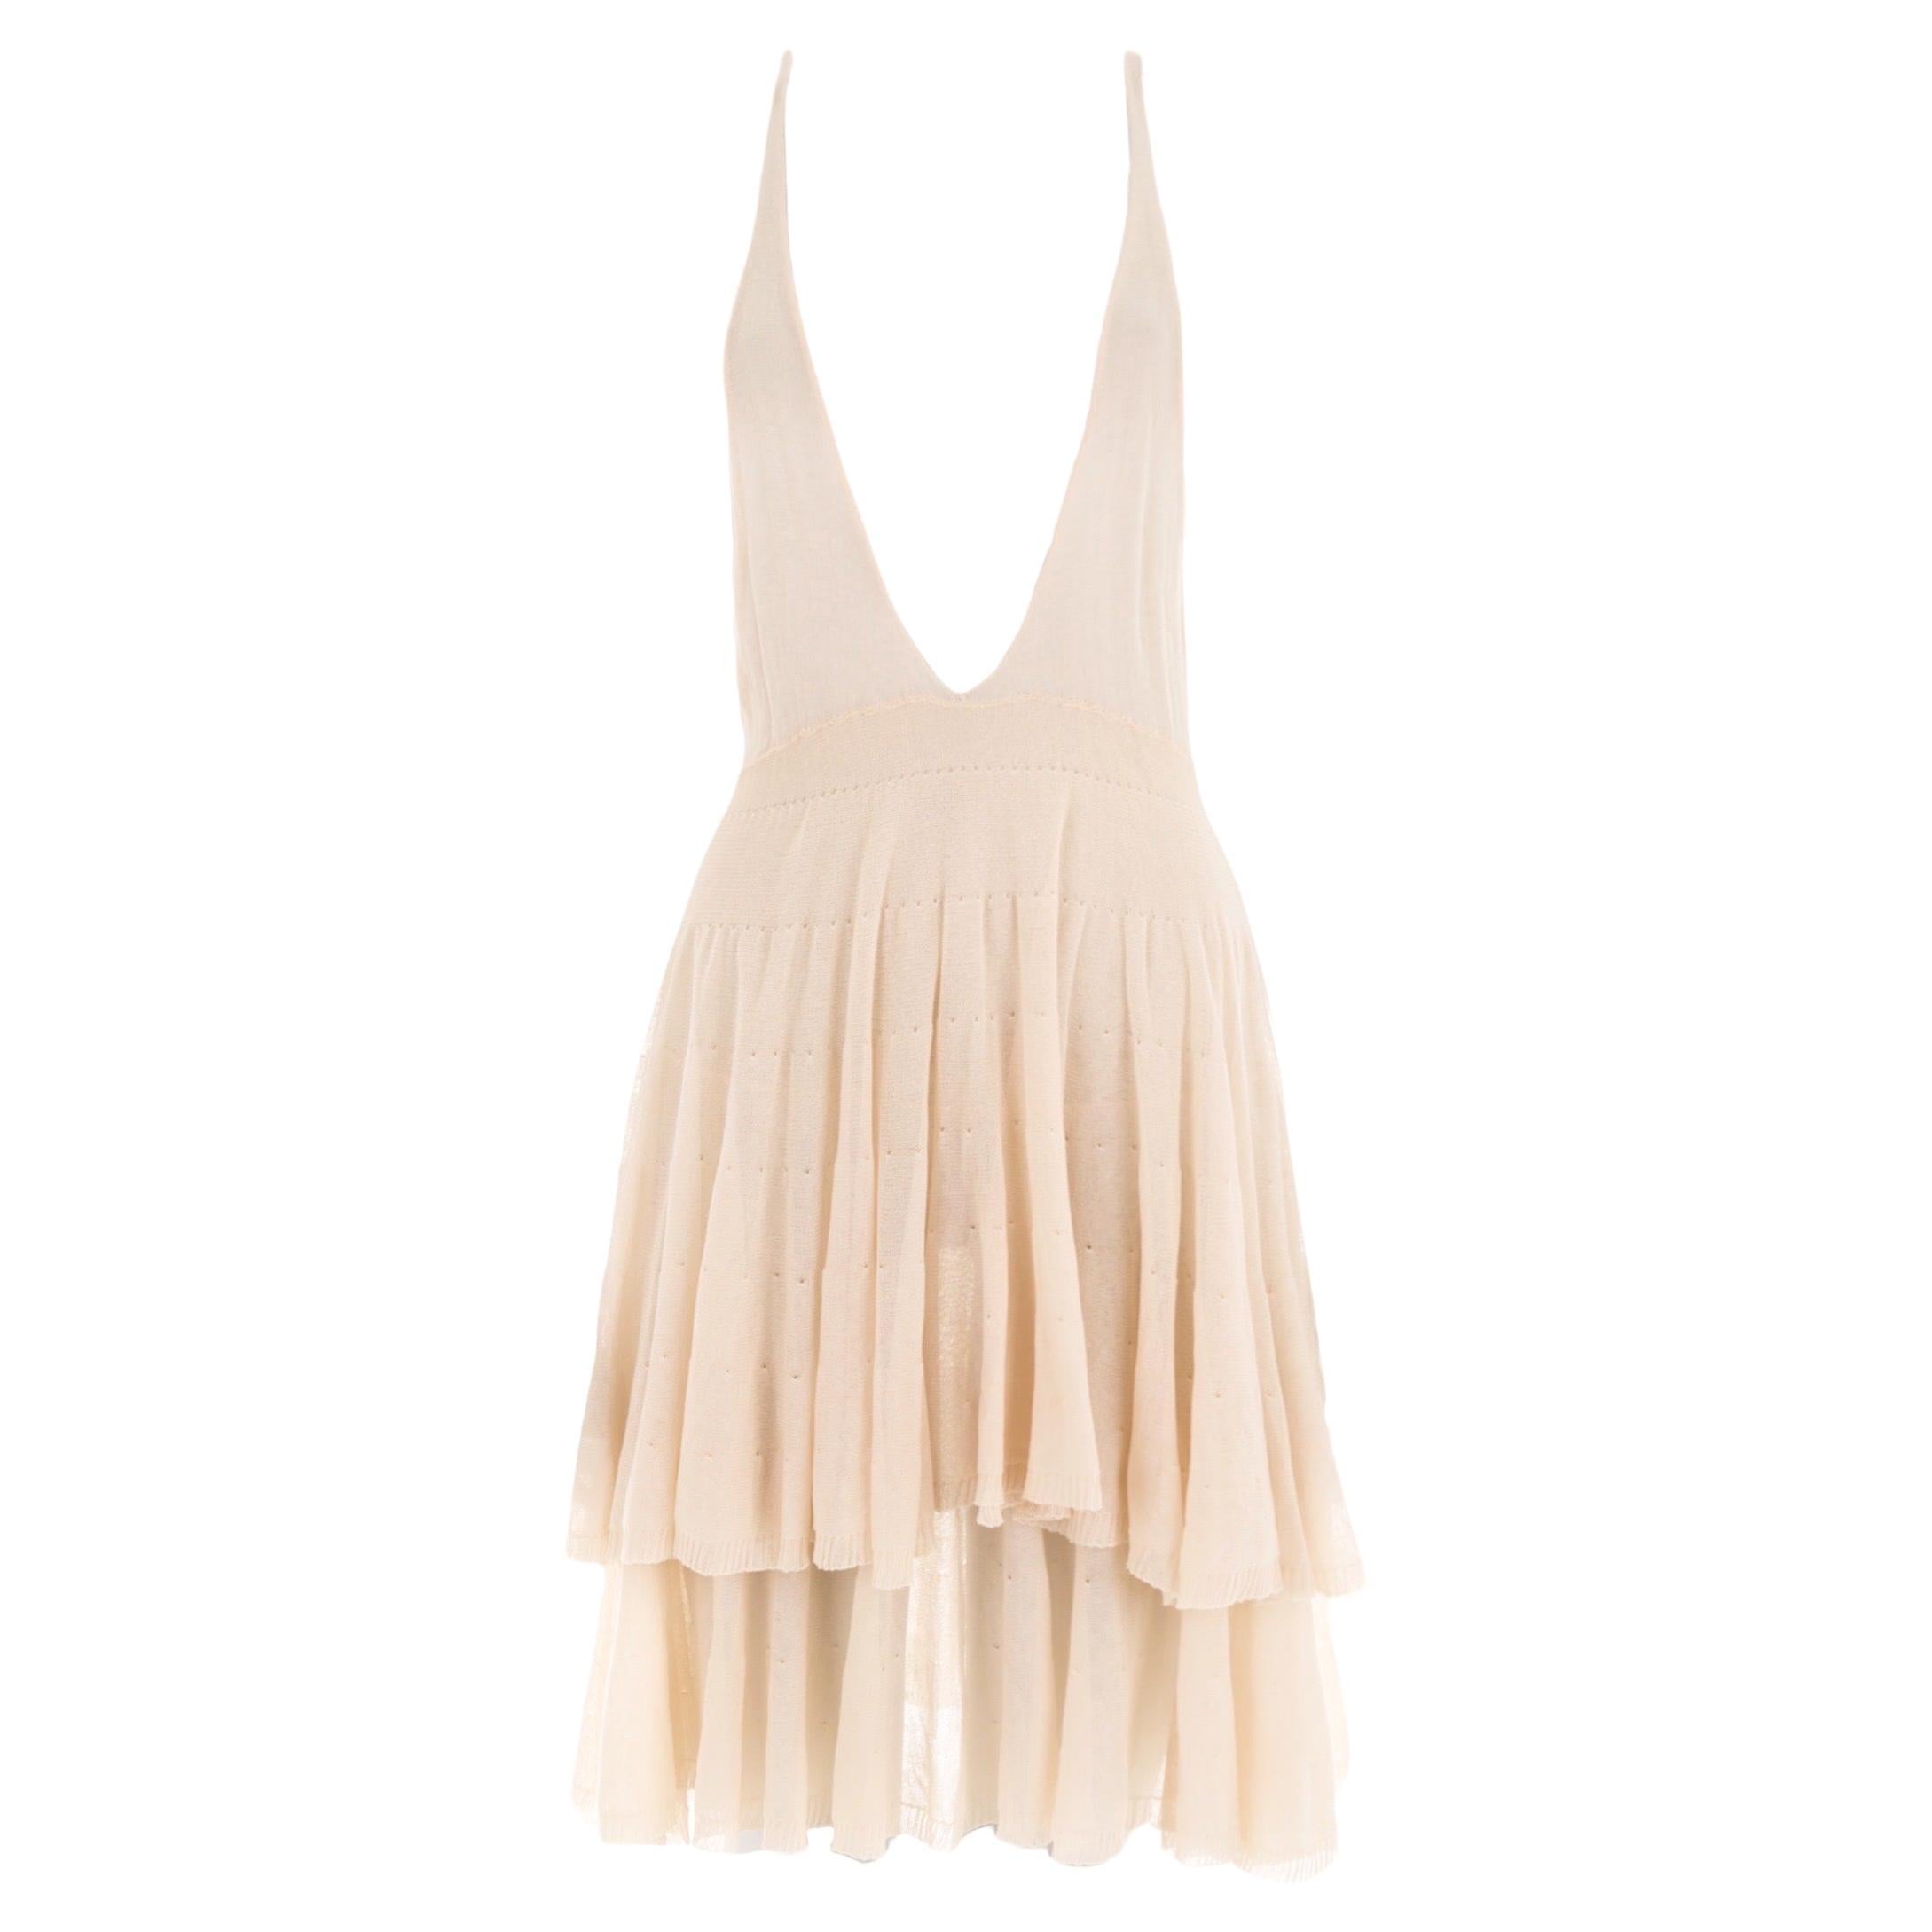 Dsquared2 S/S 2006 cream plunging knit mini dress For Sale